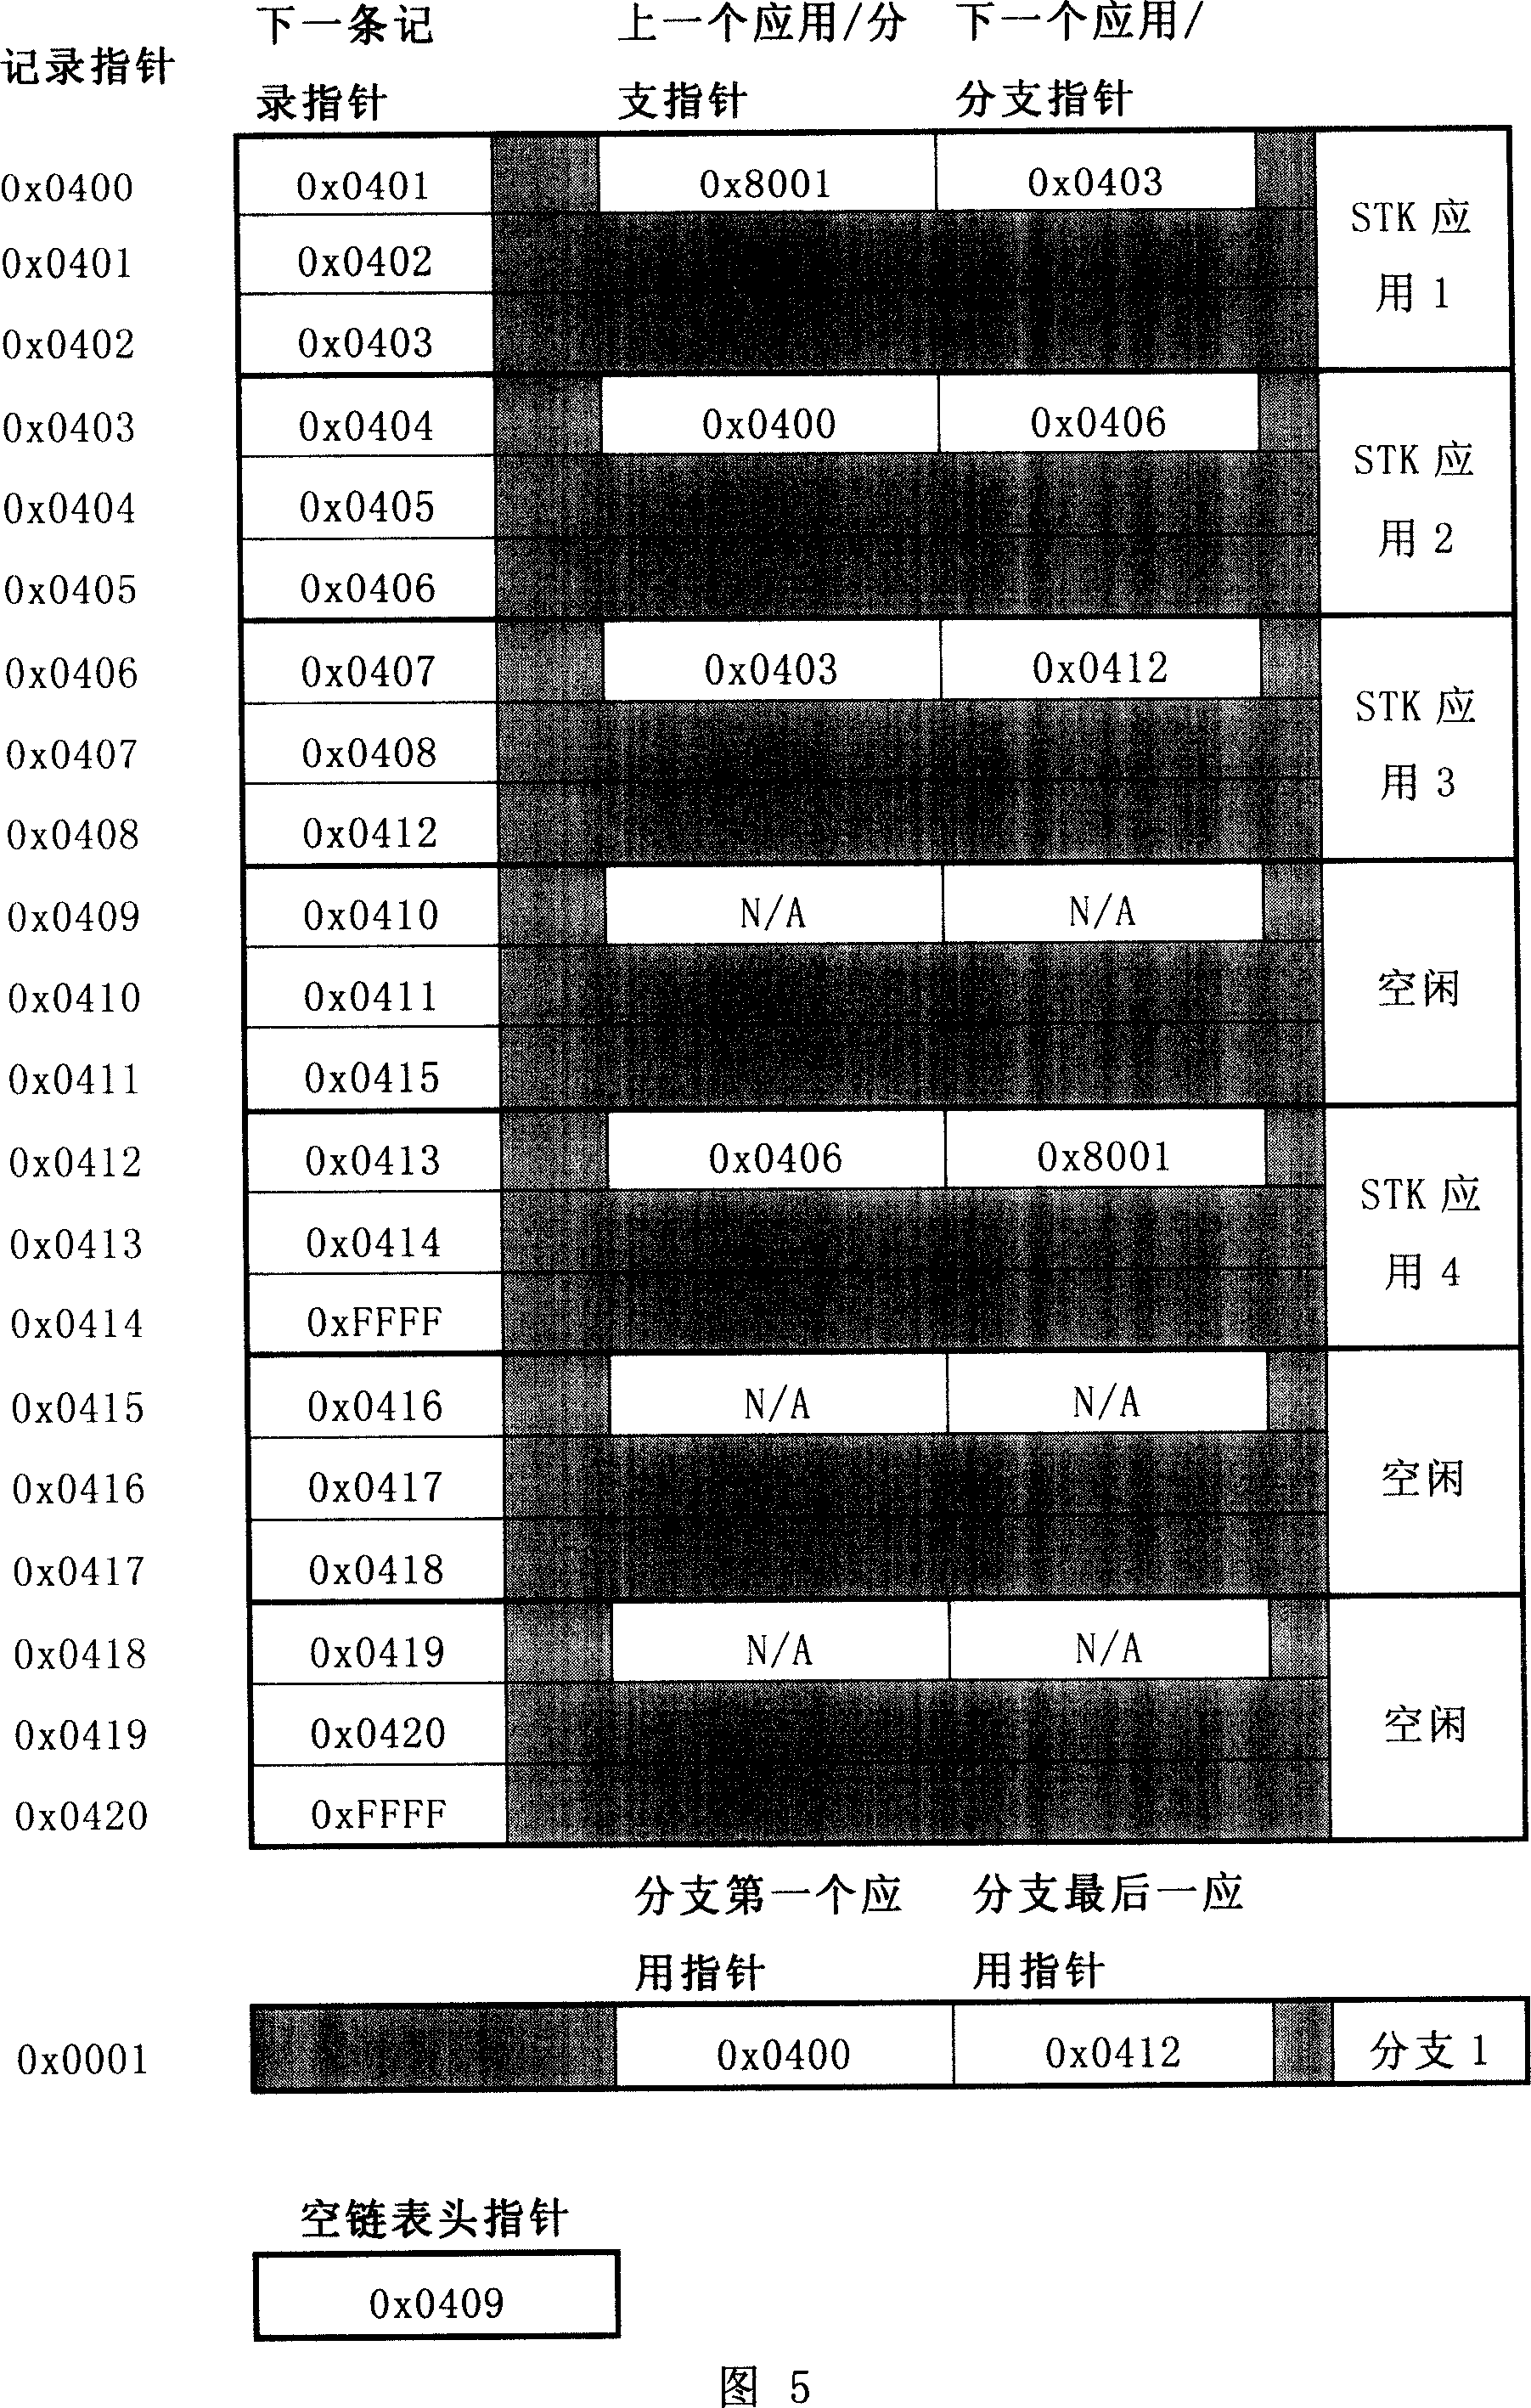 Method for storing applied data in telecommunication smart card